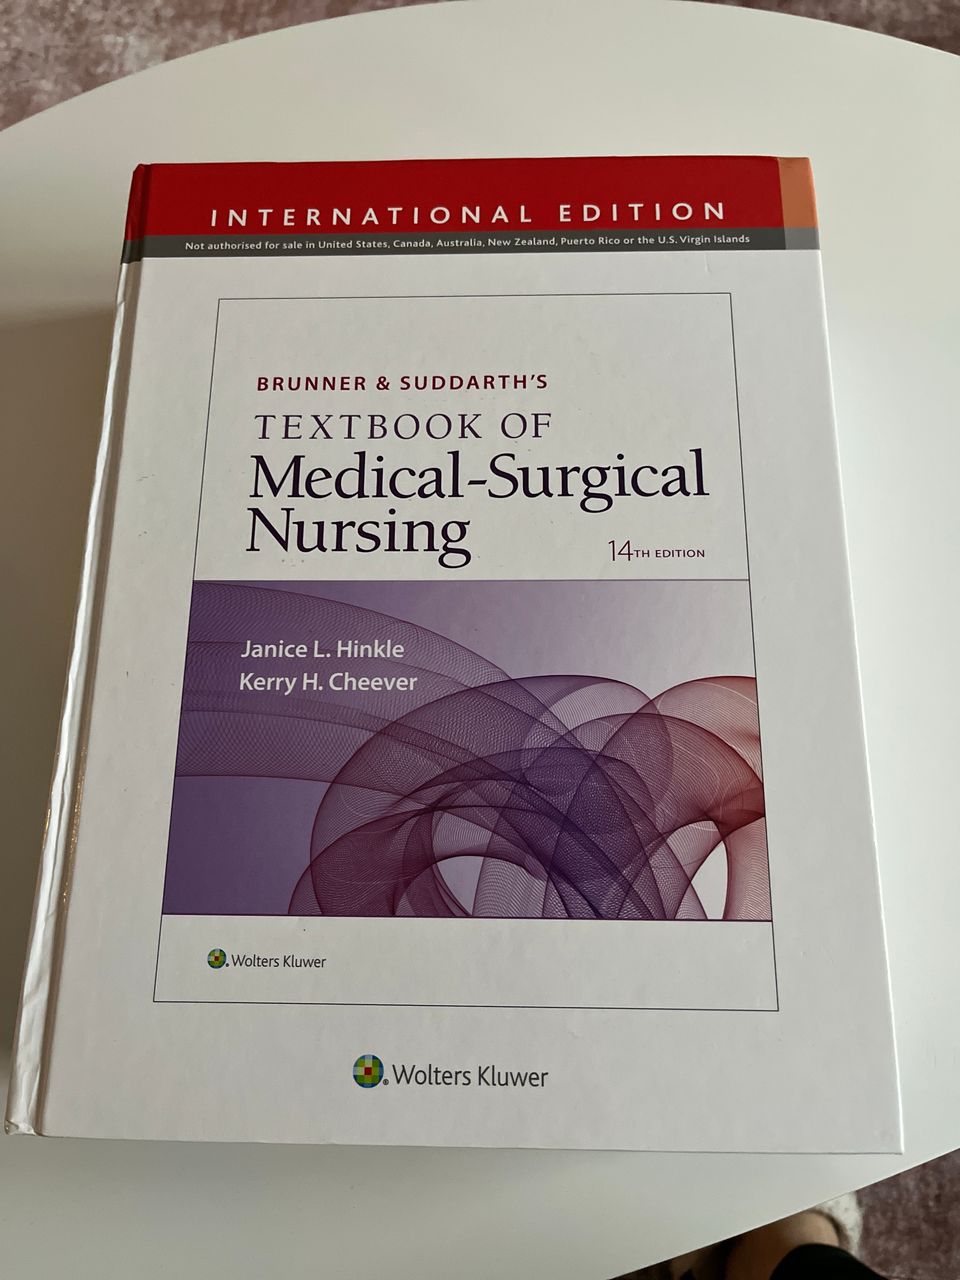 Brunner & Suddhart’s Textbook of Medical-Surgival Nursing 14th edition